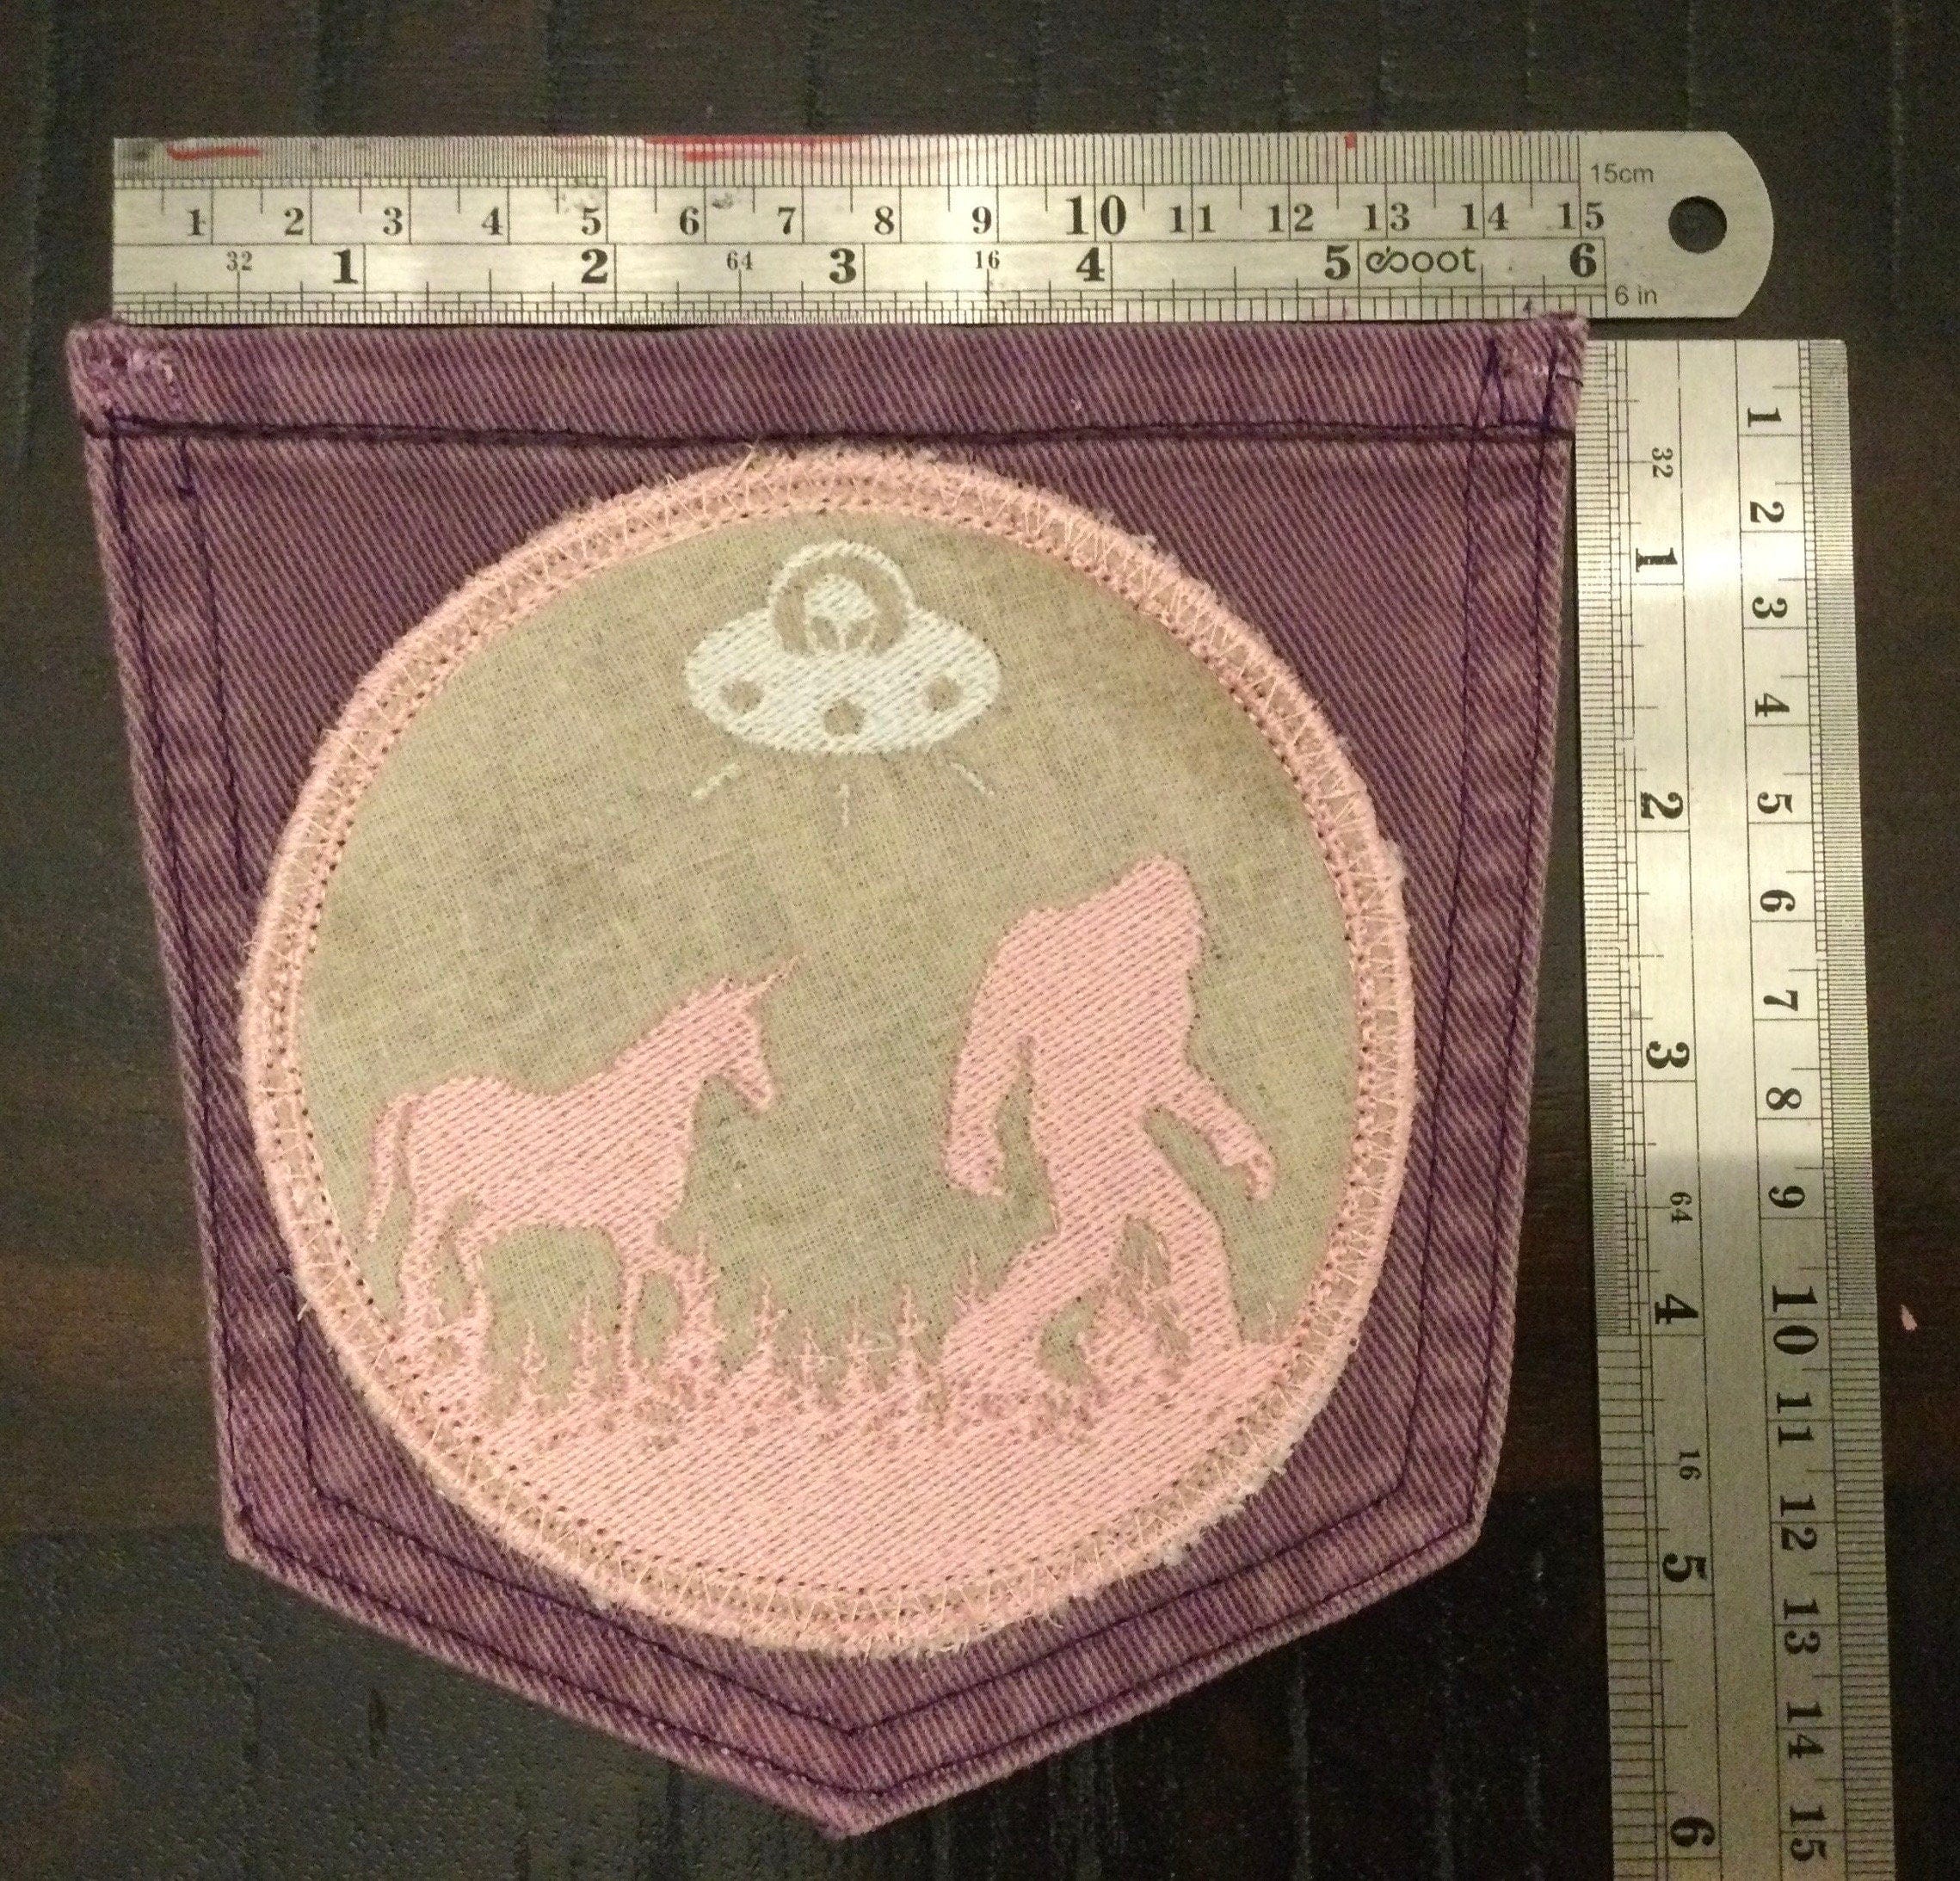 Hot Pocket BELIEVE Purple Pocket Denim Patch BIGFOOT Unicorn UFO pink and silver on wheat background Appliques & Patches